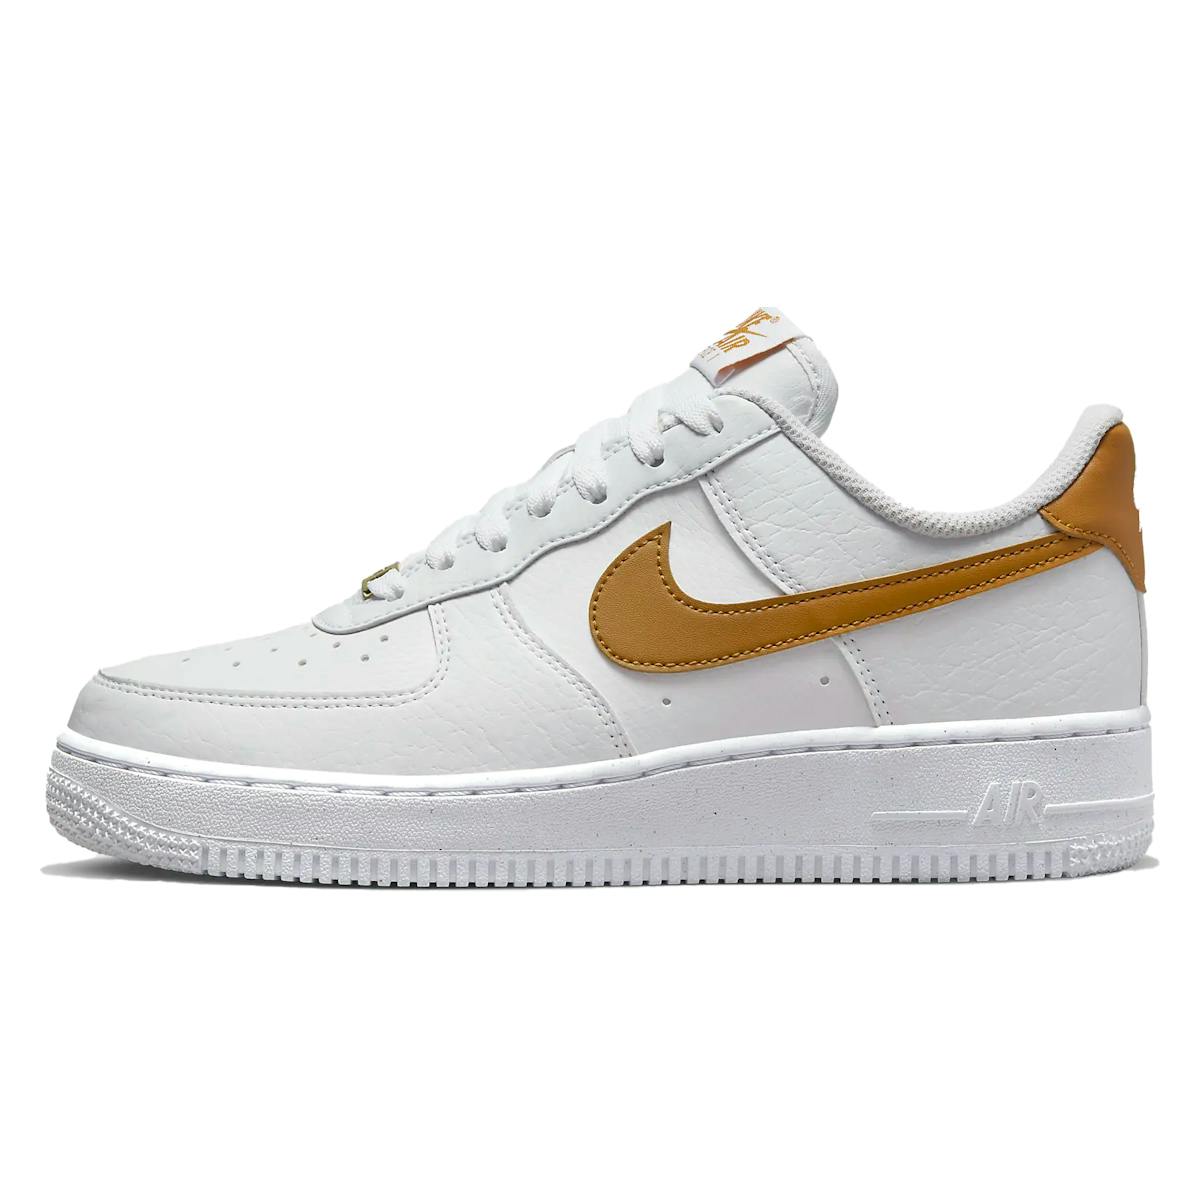 Nike Air Force 1 '07 Next Nature "Gold Suede"